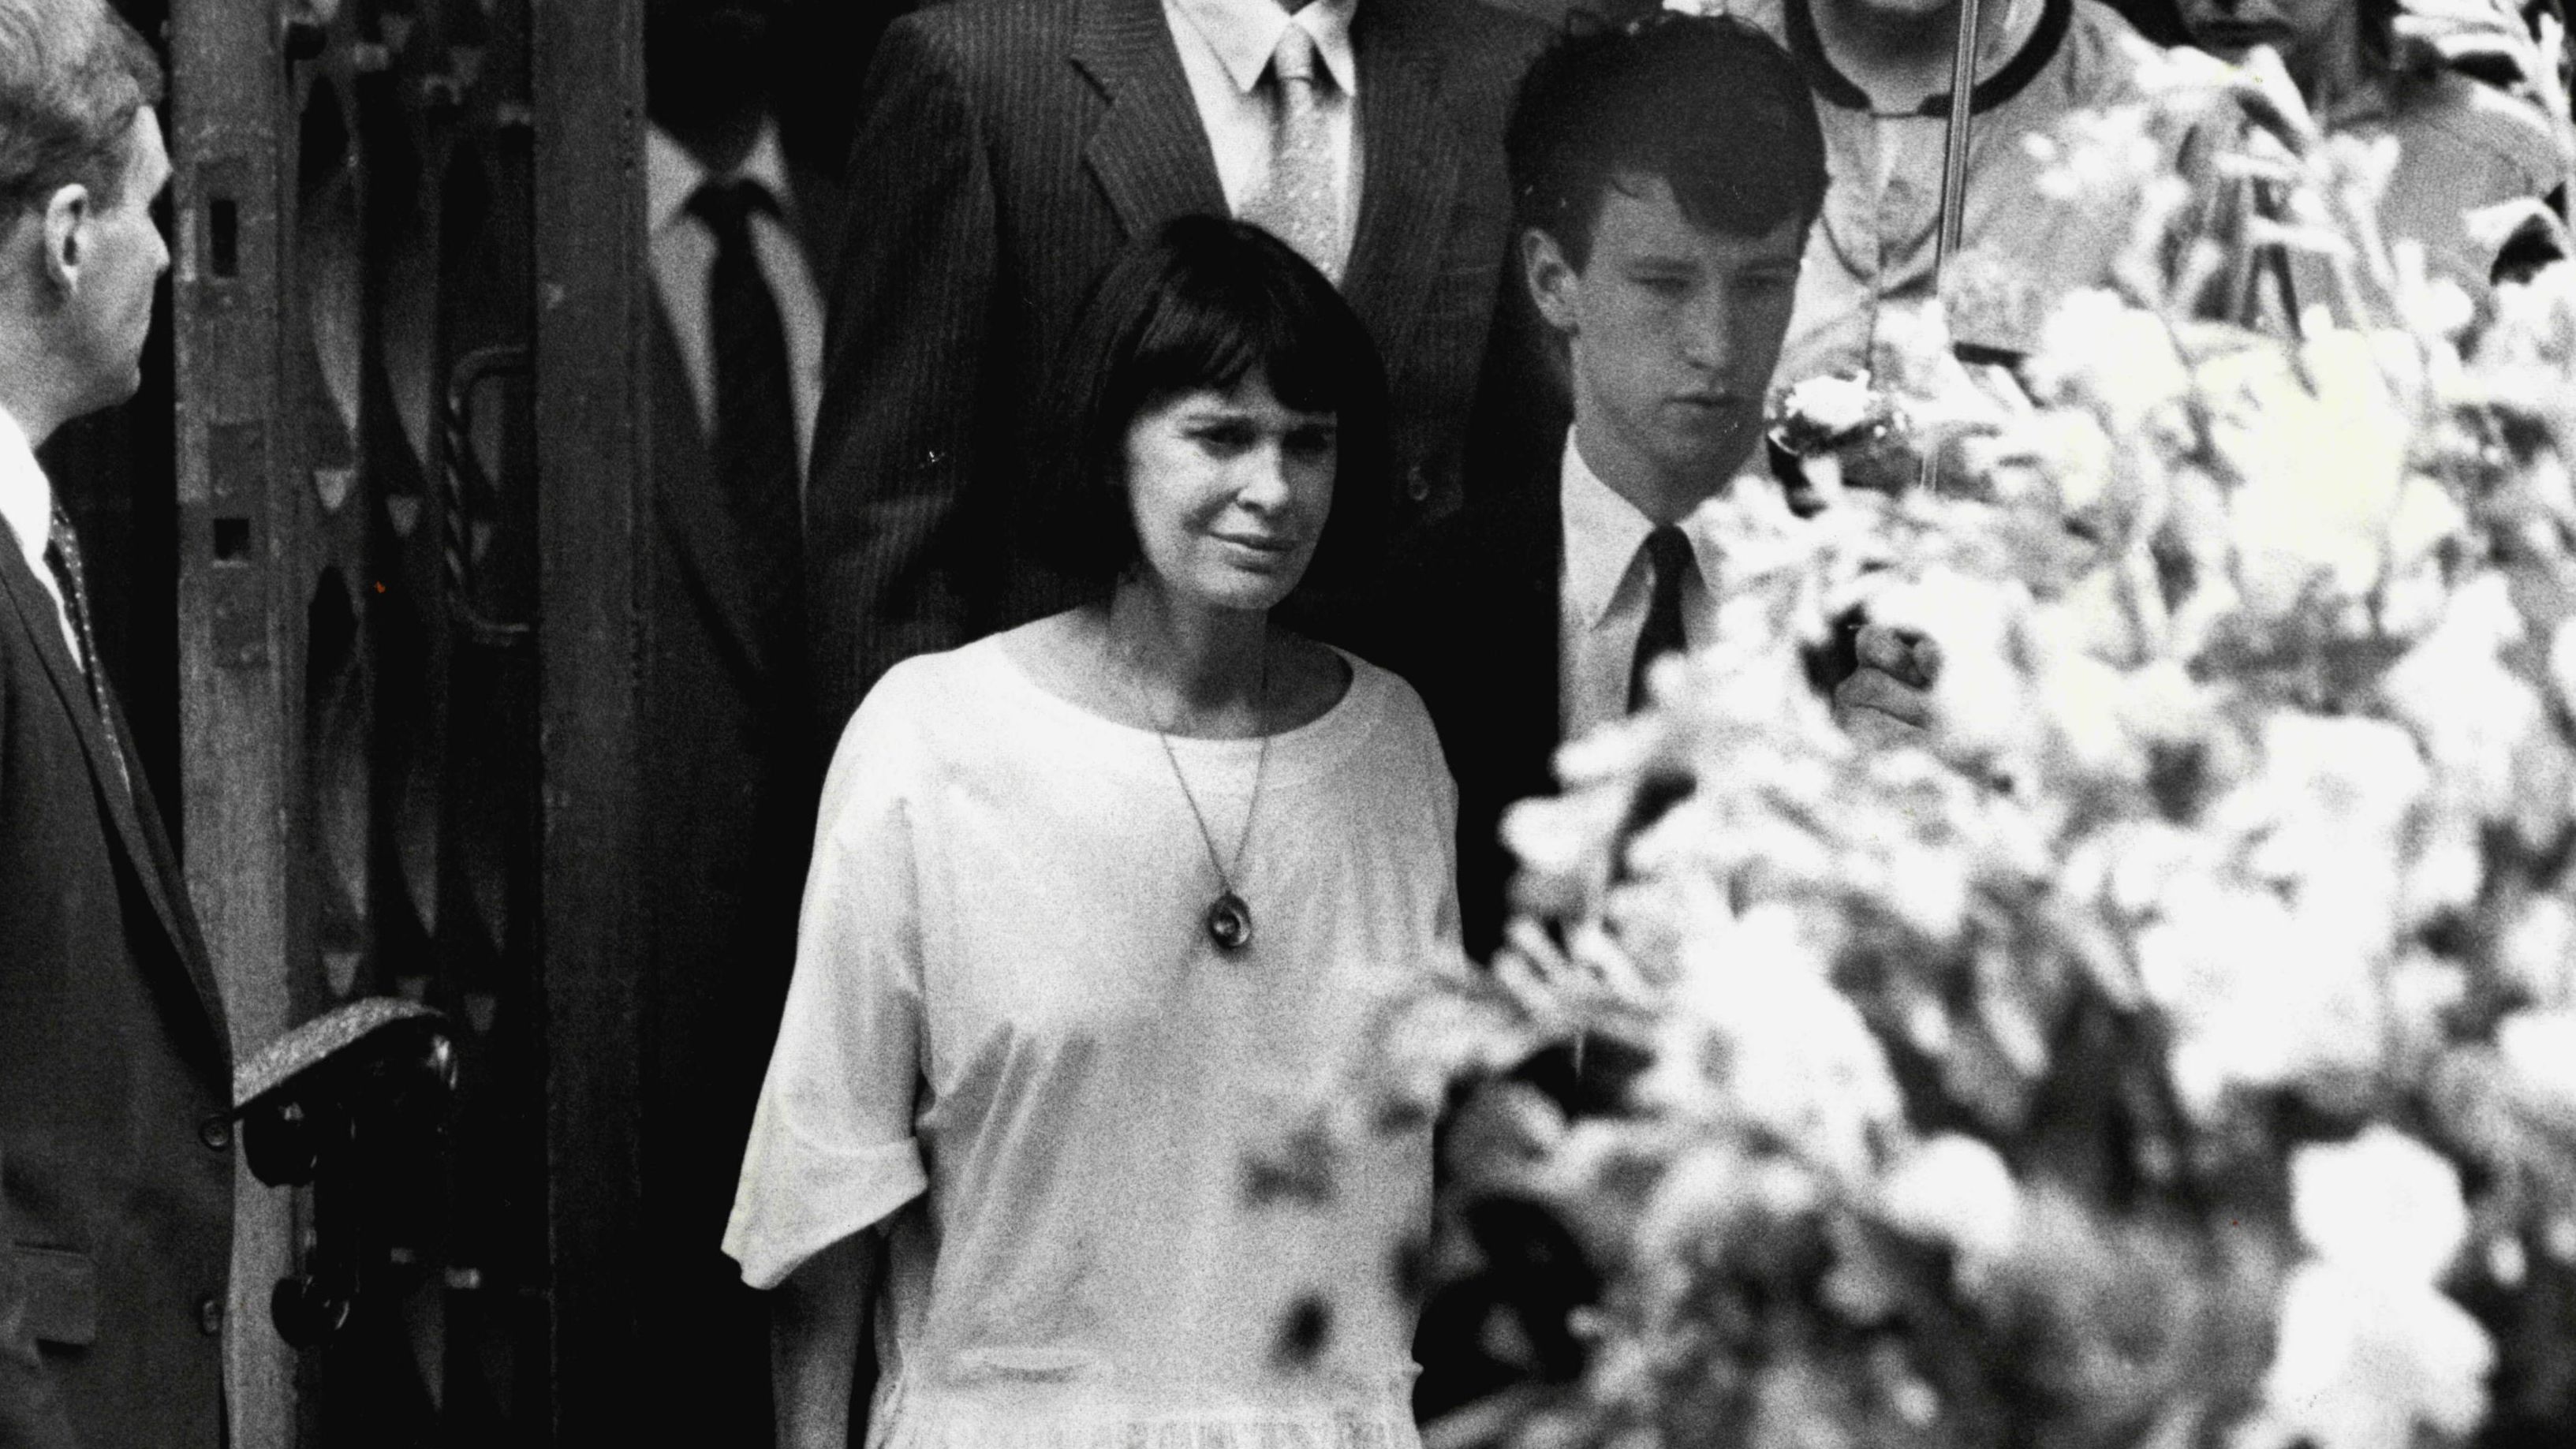 Vanderbilt attends the funeral of her son Carter in 1988. The 23-year-old, who had been suffering from depression, jumped from the 14th-floor terrace of his parents' penthouse in Manhattan.